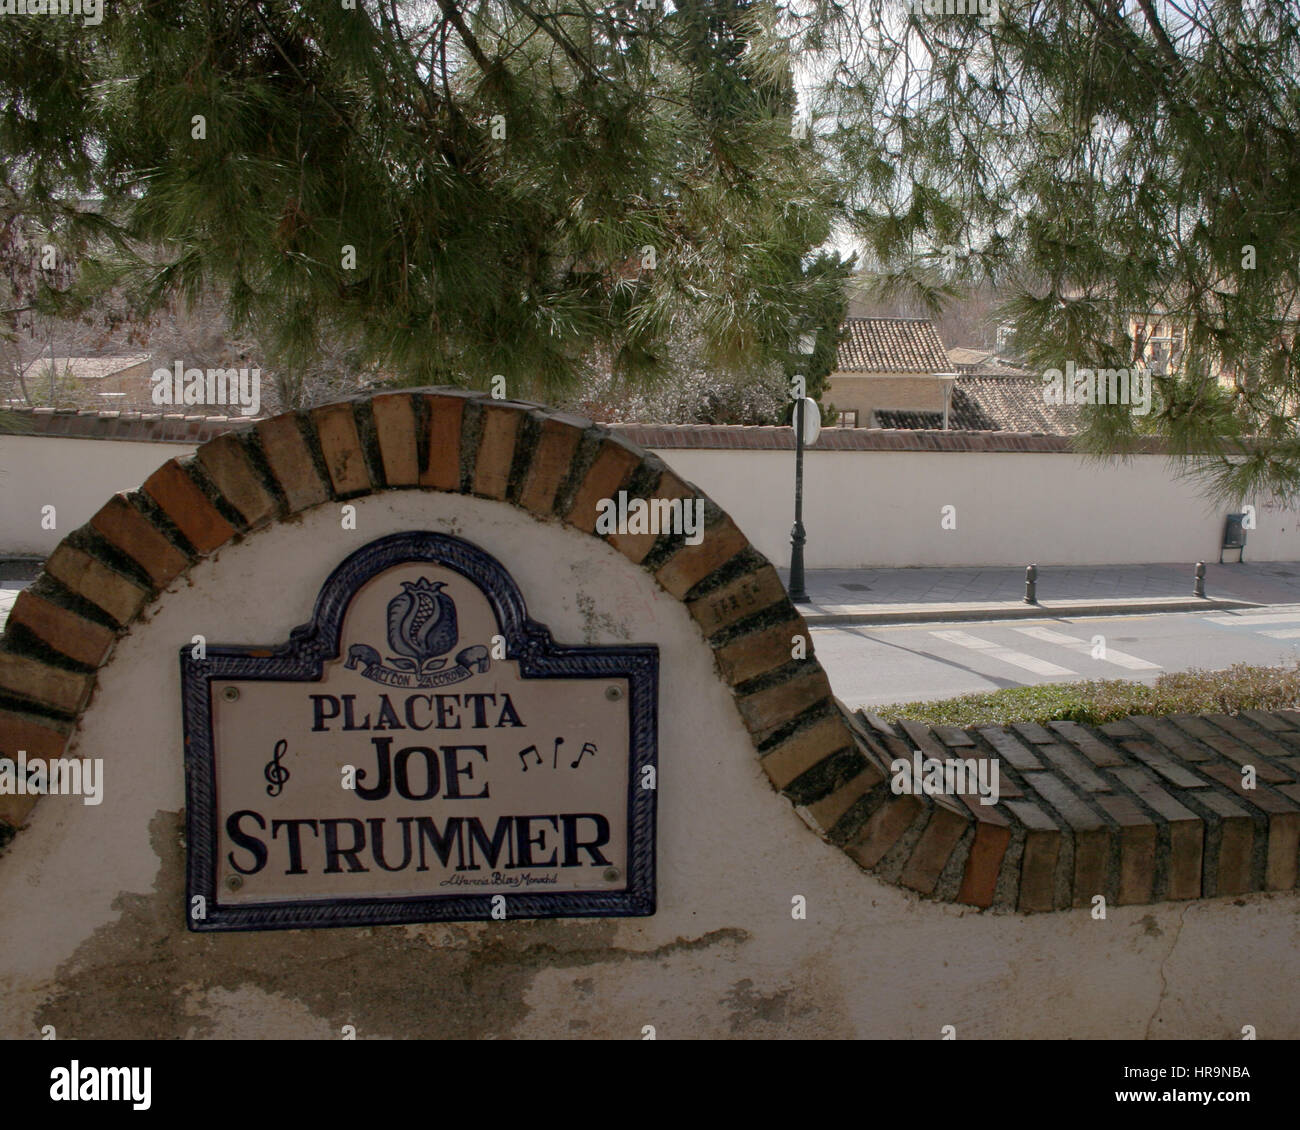 Joe Strummer square dedicated to the former frontman of punk band The Clash, and called Placeta Joe Strummer, in Granada, Granada, Andalucia, Spain Stock Photo